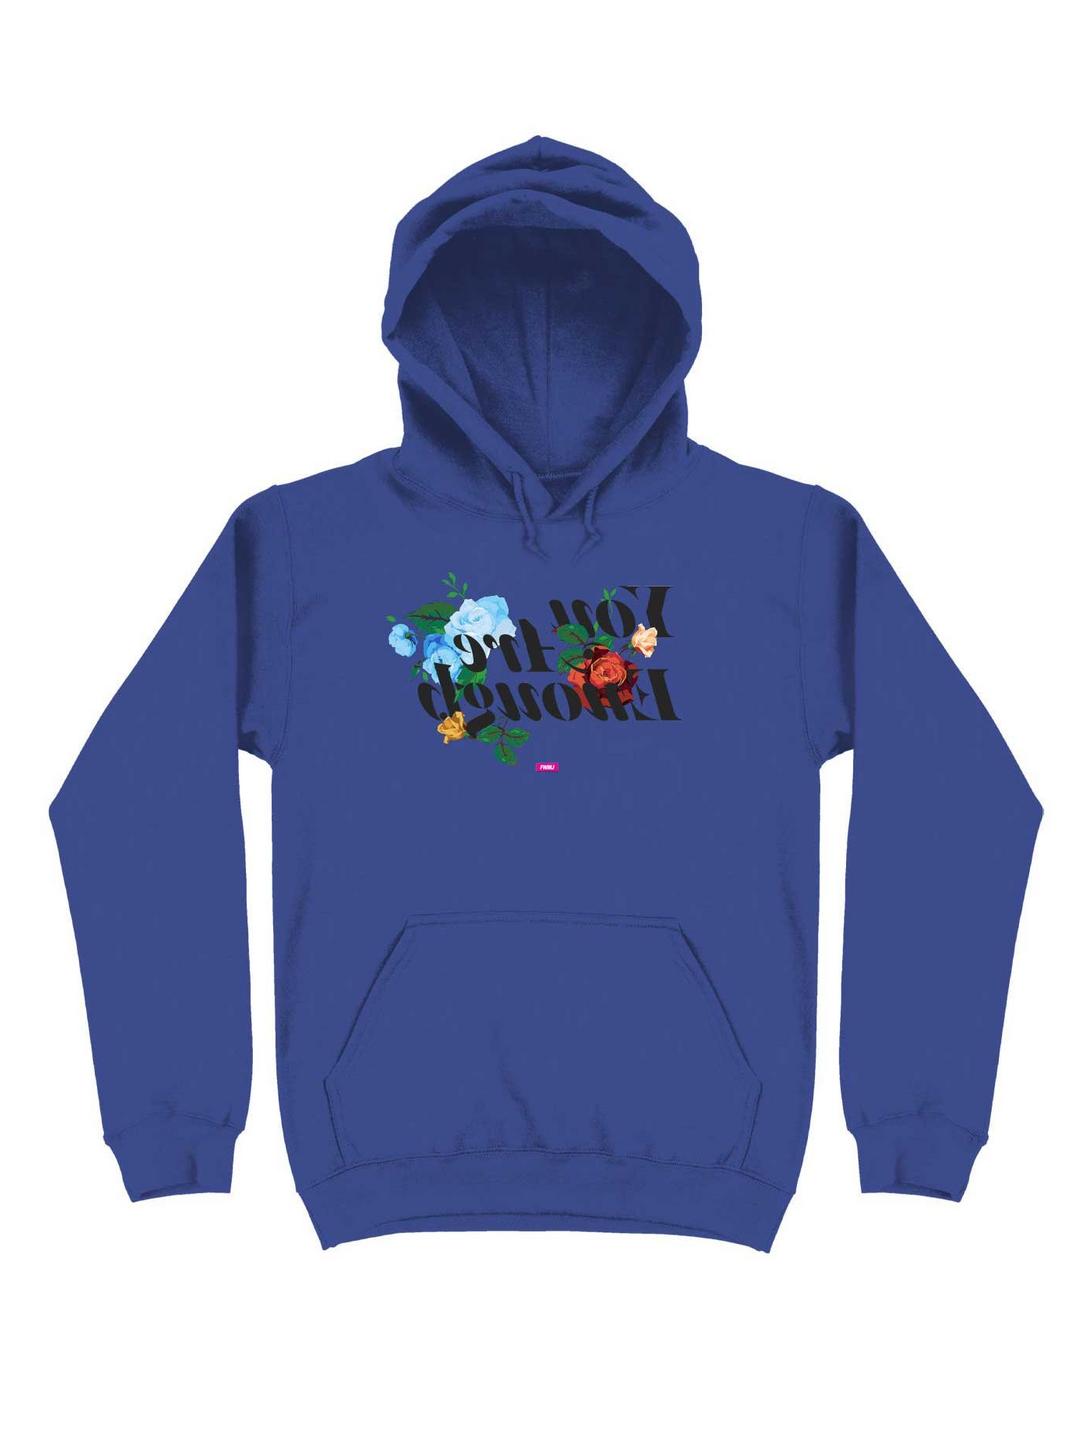 Black History Month FWMJ You Are Enough Hoodie, ROYAL, hi-res